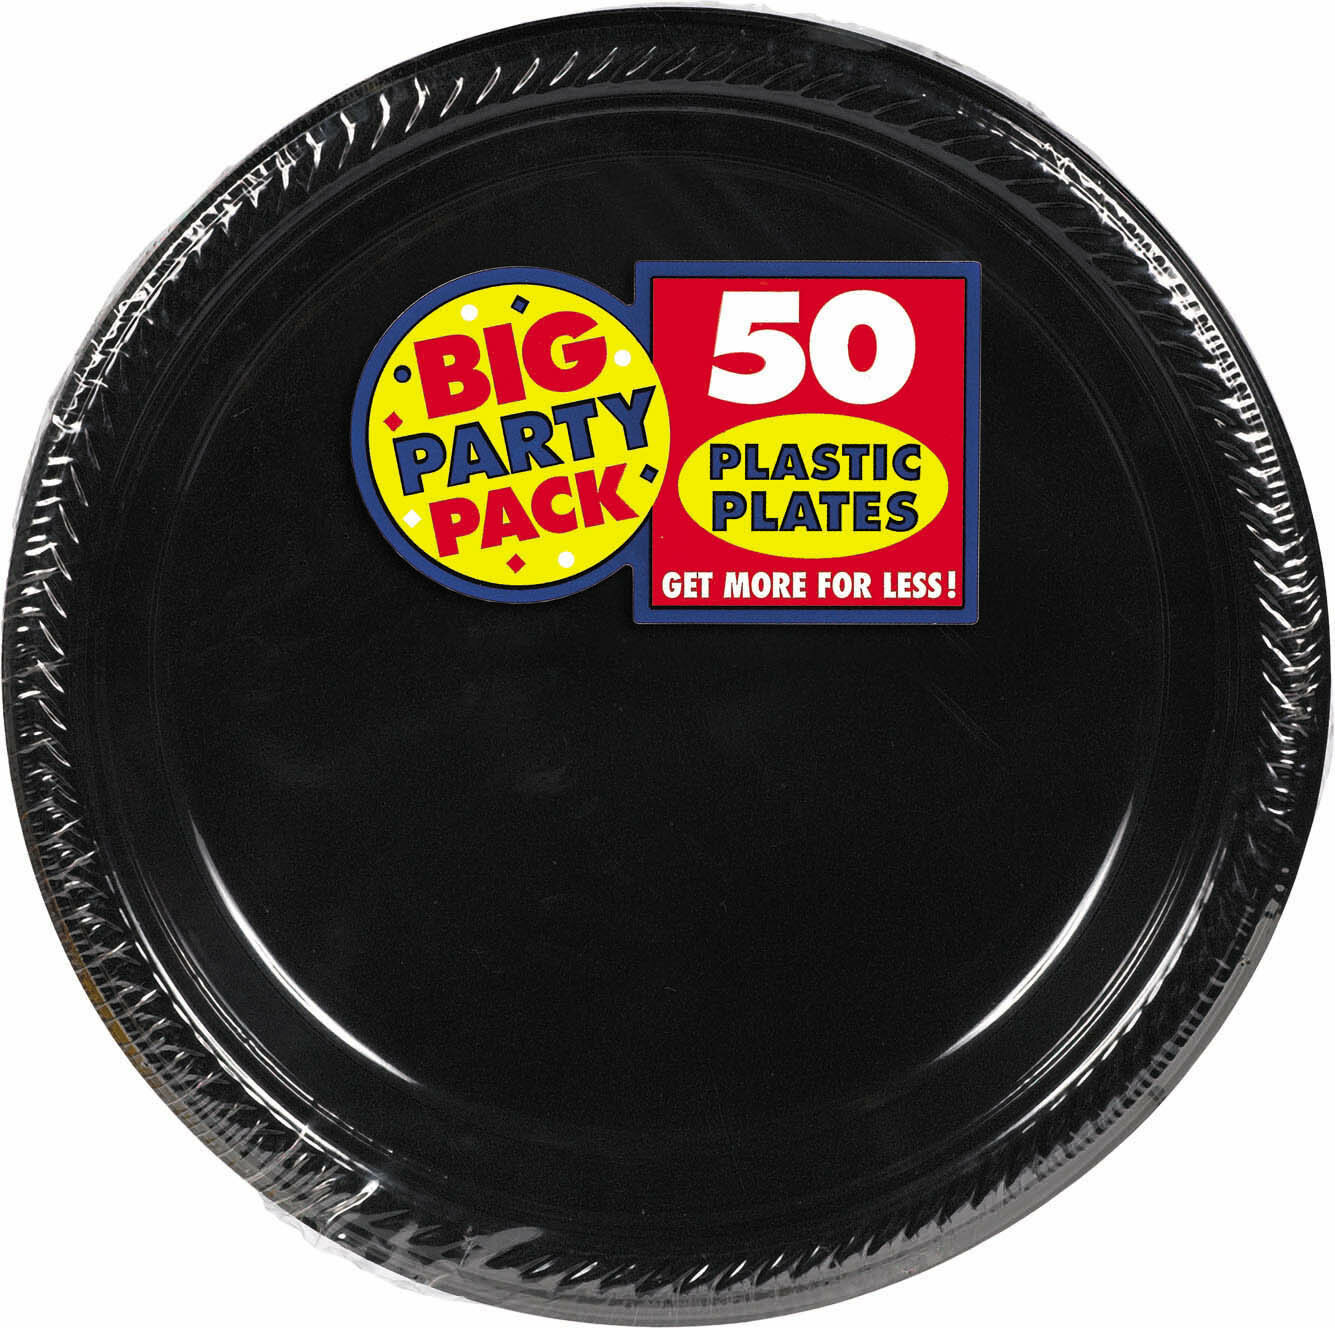 Picnics & BBQ's For Parties Yellow Pack of 4 Re-Usable Plastic Plates